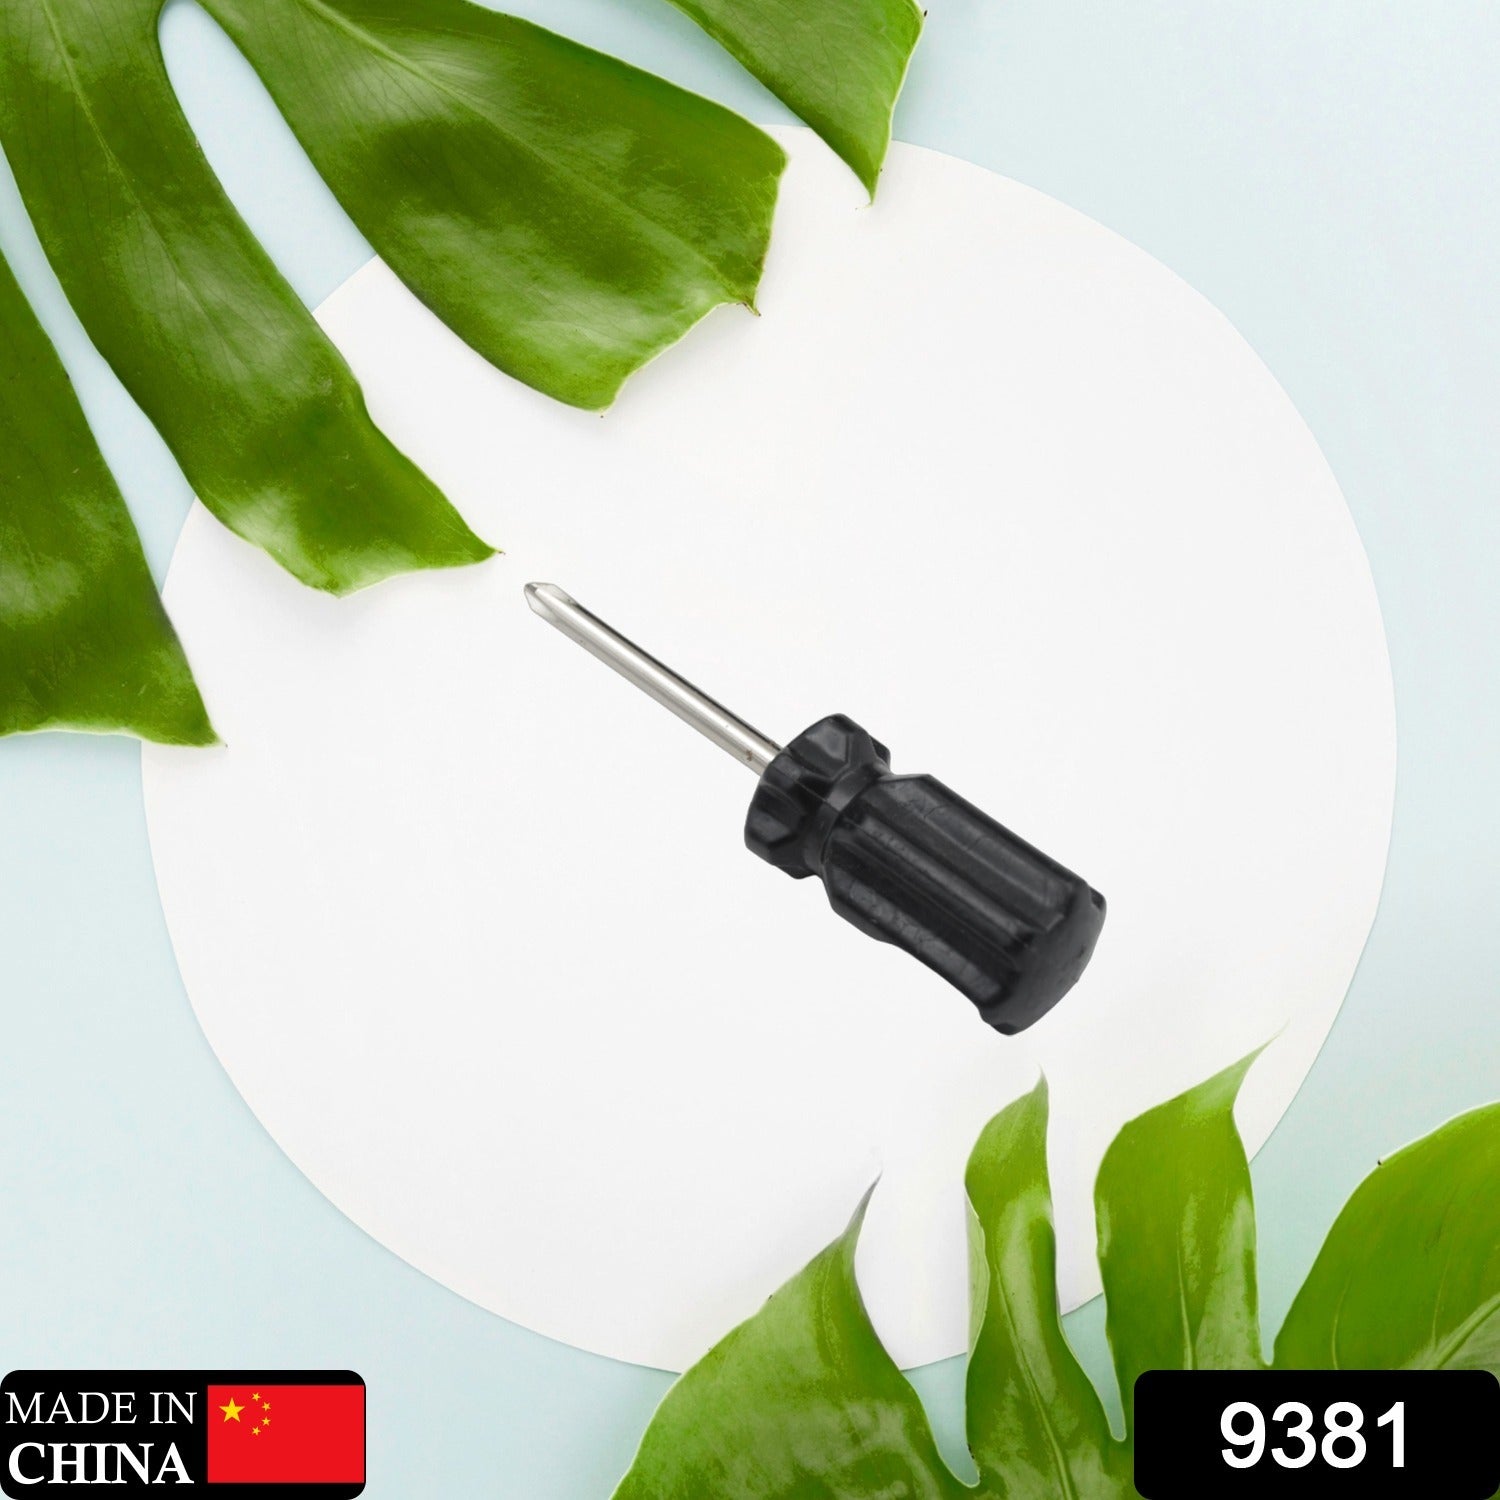 9381 Mini Slotted Screwdriver, Flat Head with Black Handle for Small Appliances Mini Pocket Size Slotted Cross Head Double Sided Flat Magnetic Screwdriver (1 Pc)